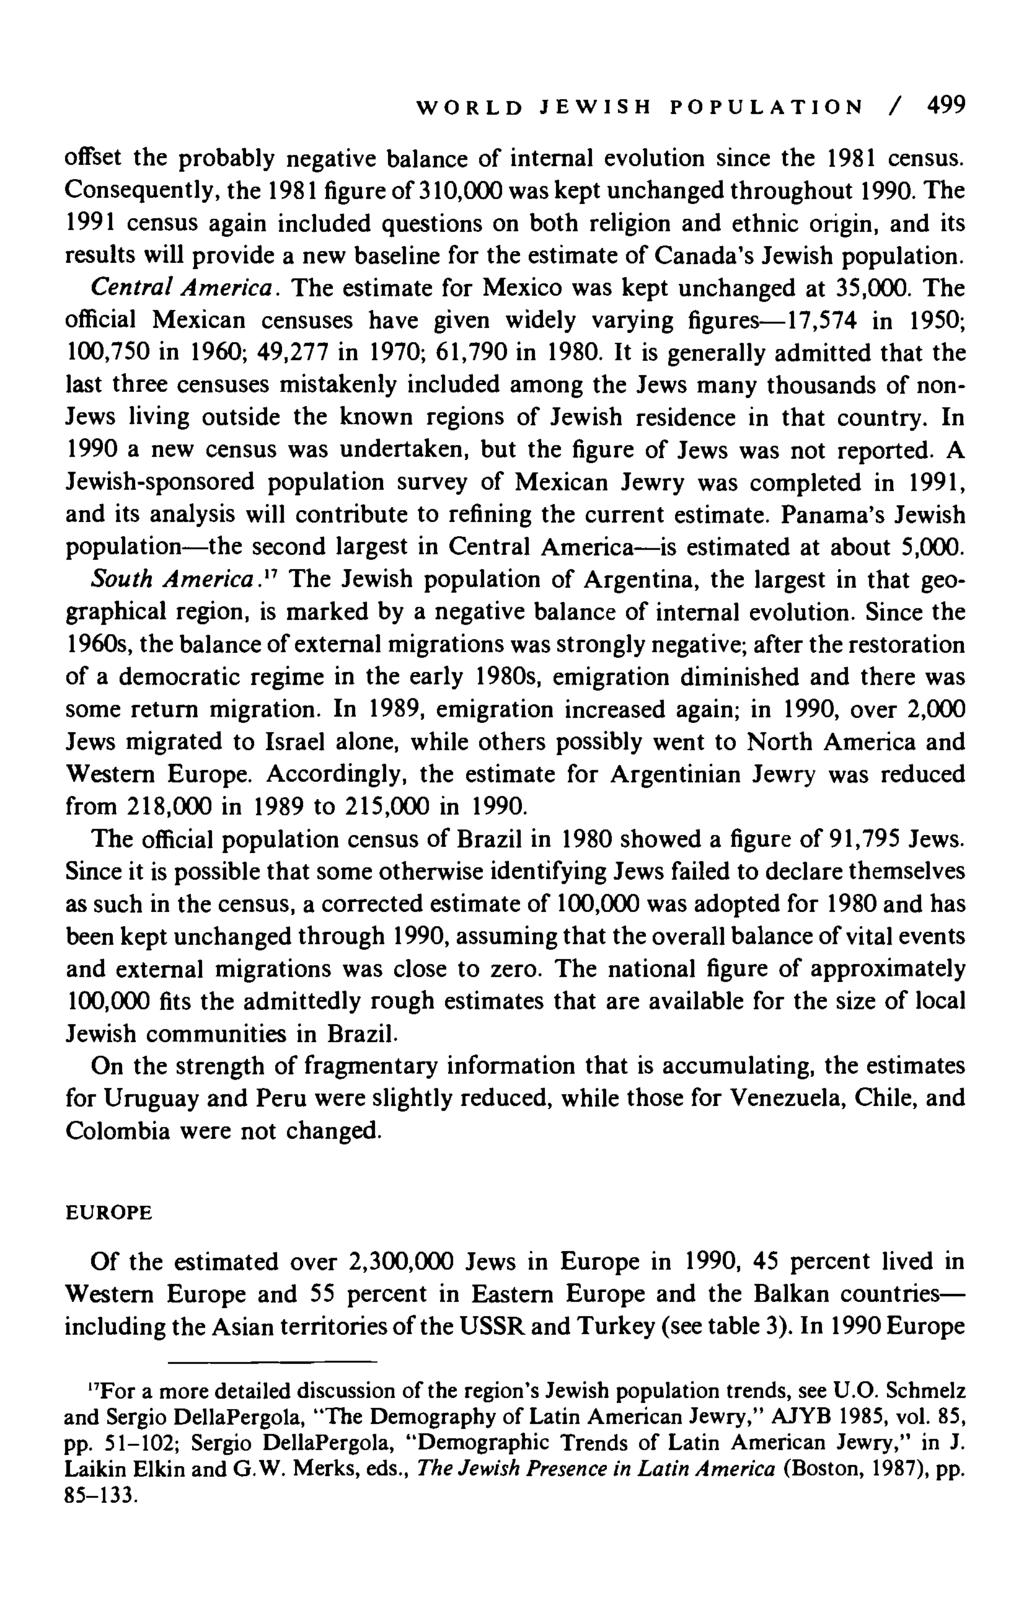 WORL JEWISH POPULATION / 499 offset the probably negative balance of internal evolution since the 1981 census. Consequently, the 1981 figure of 310,000 was kept unchanged throughout 1990.